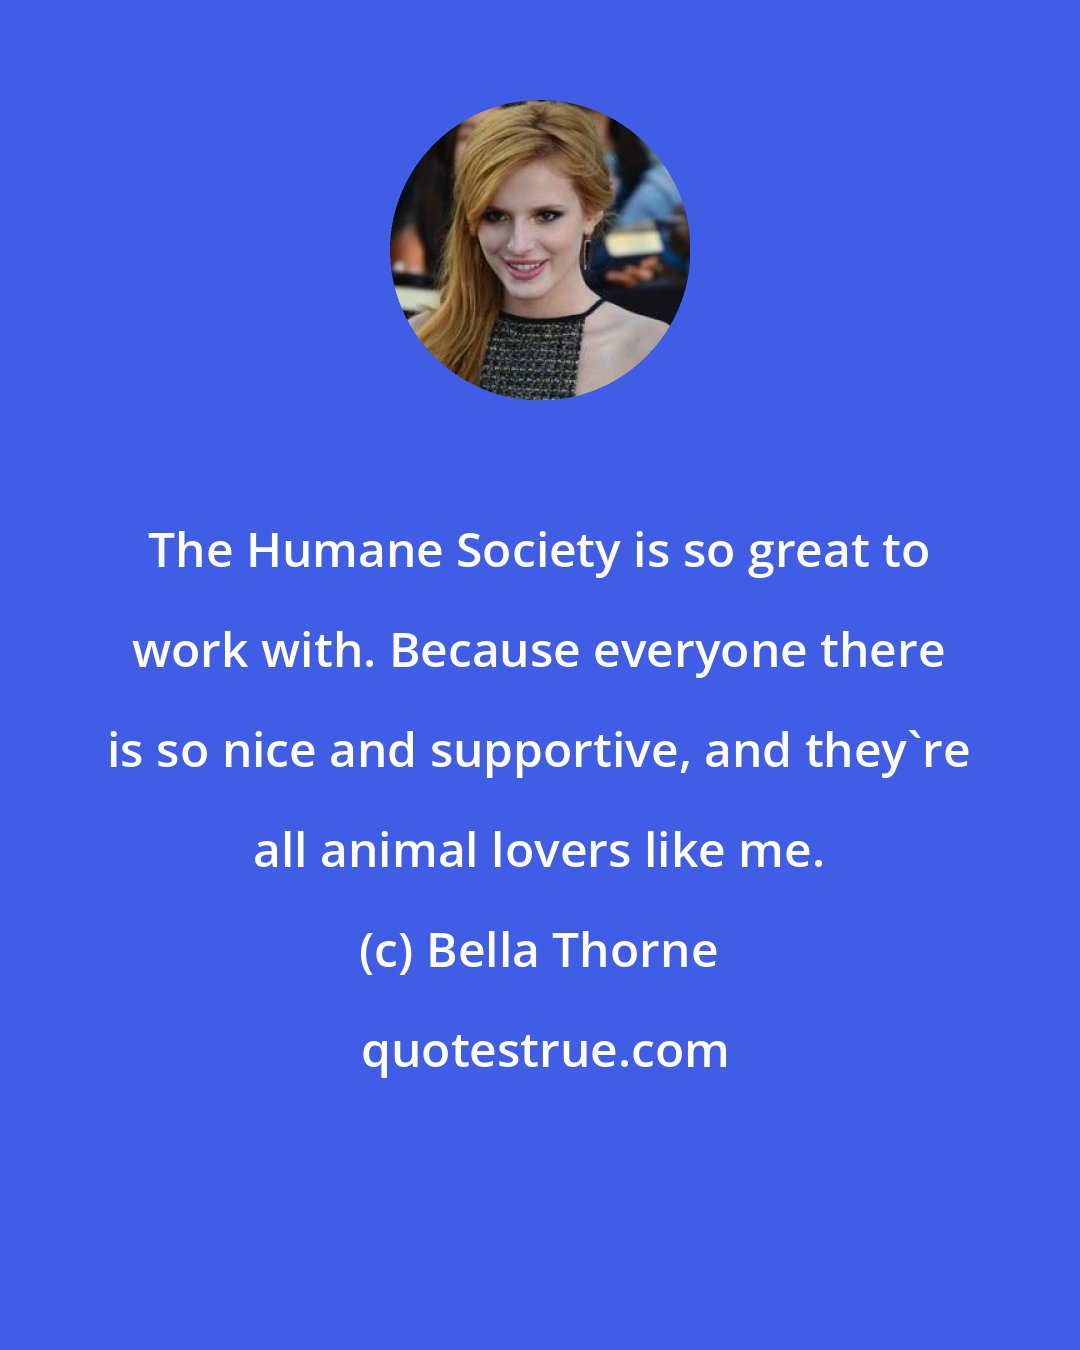 Bella Thorne: The Humane Society is so great to work with. Because everyone there is so nice and supportive, and they're all animal lovers like me.